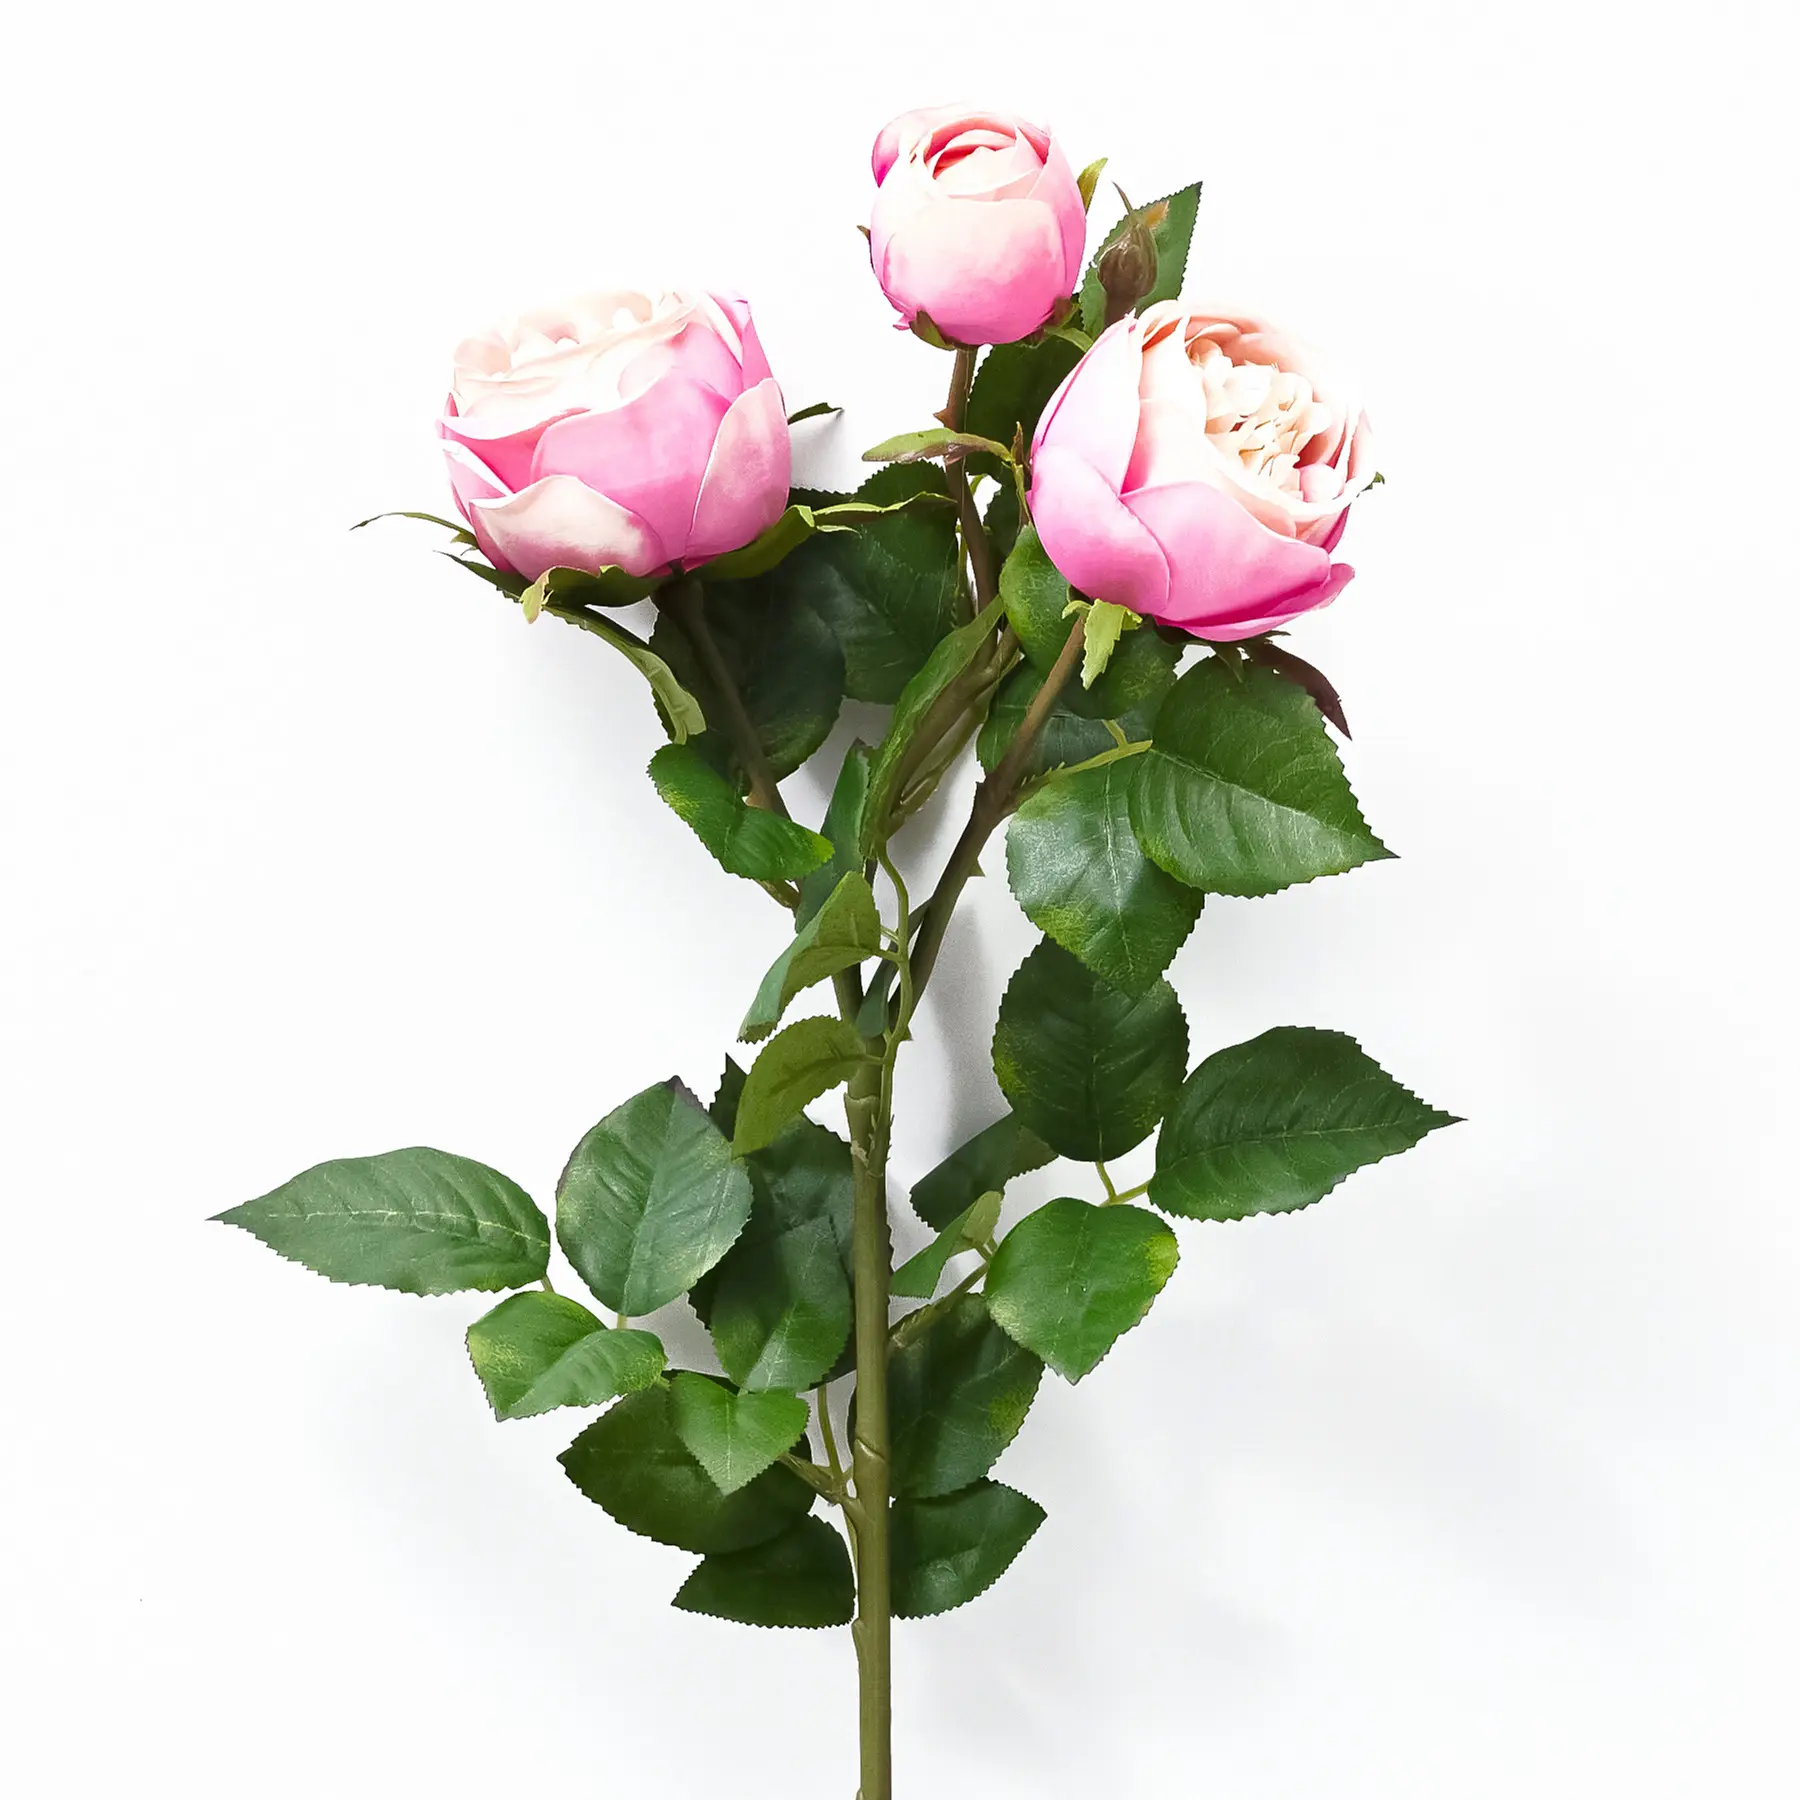 High quality artificial fabric flowers real touch 29"h ross Bush*3 artificial flowers rose